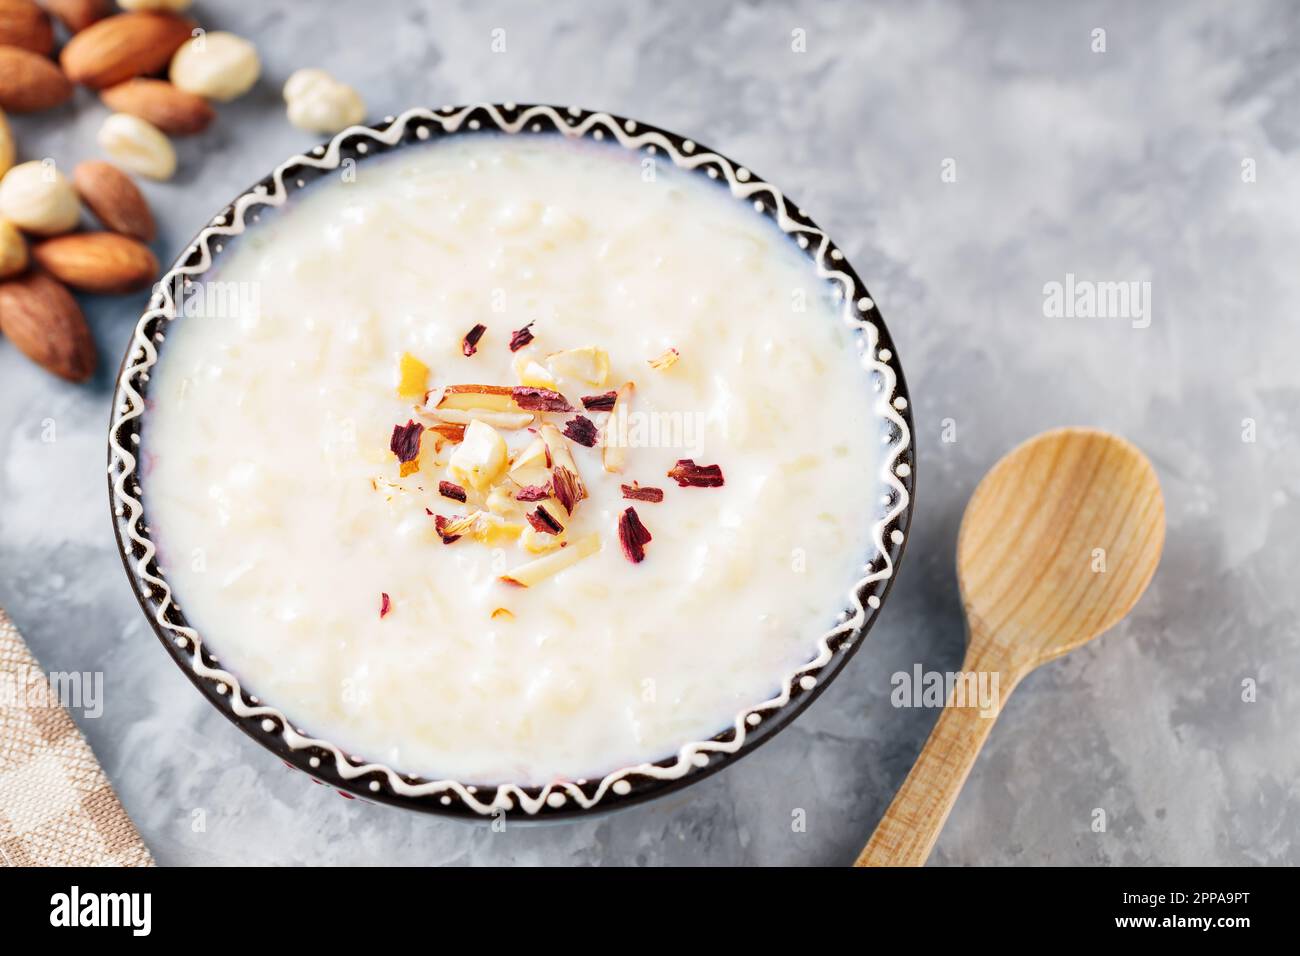 Indian kheer rice pudding with nuts on concrete. Bowl with rice pudding and a wooden spoon on a gray background. Top view Stock Photo